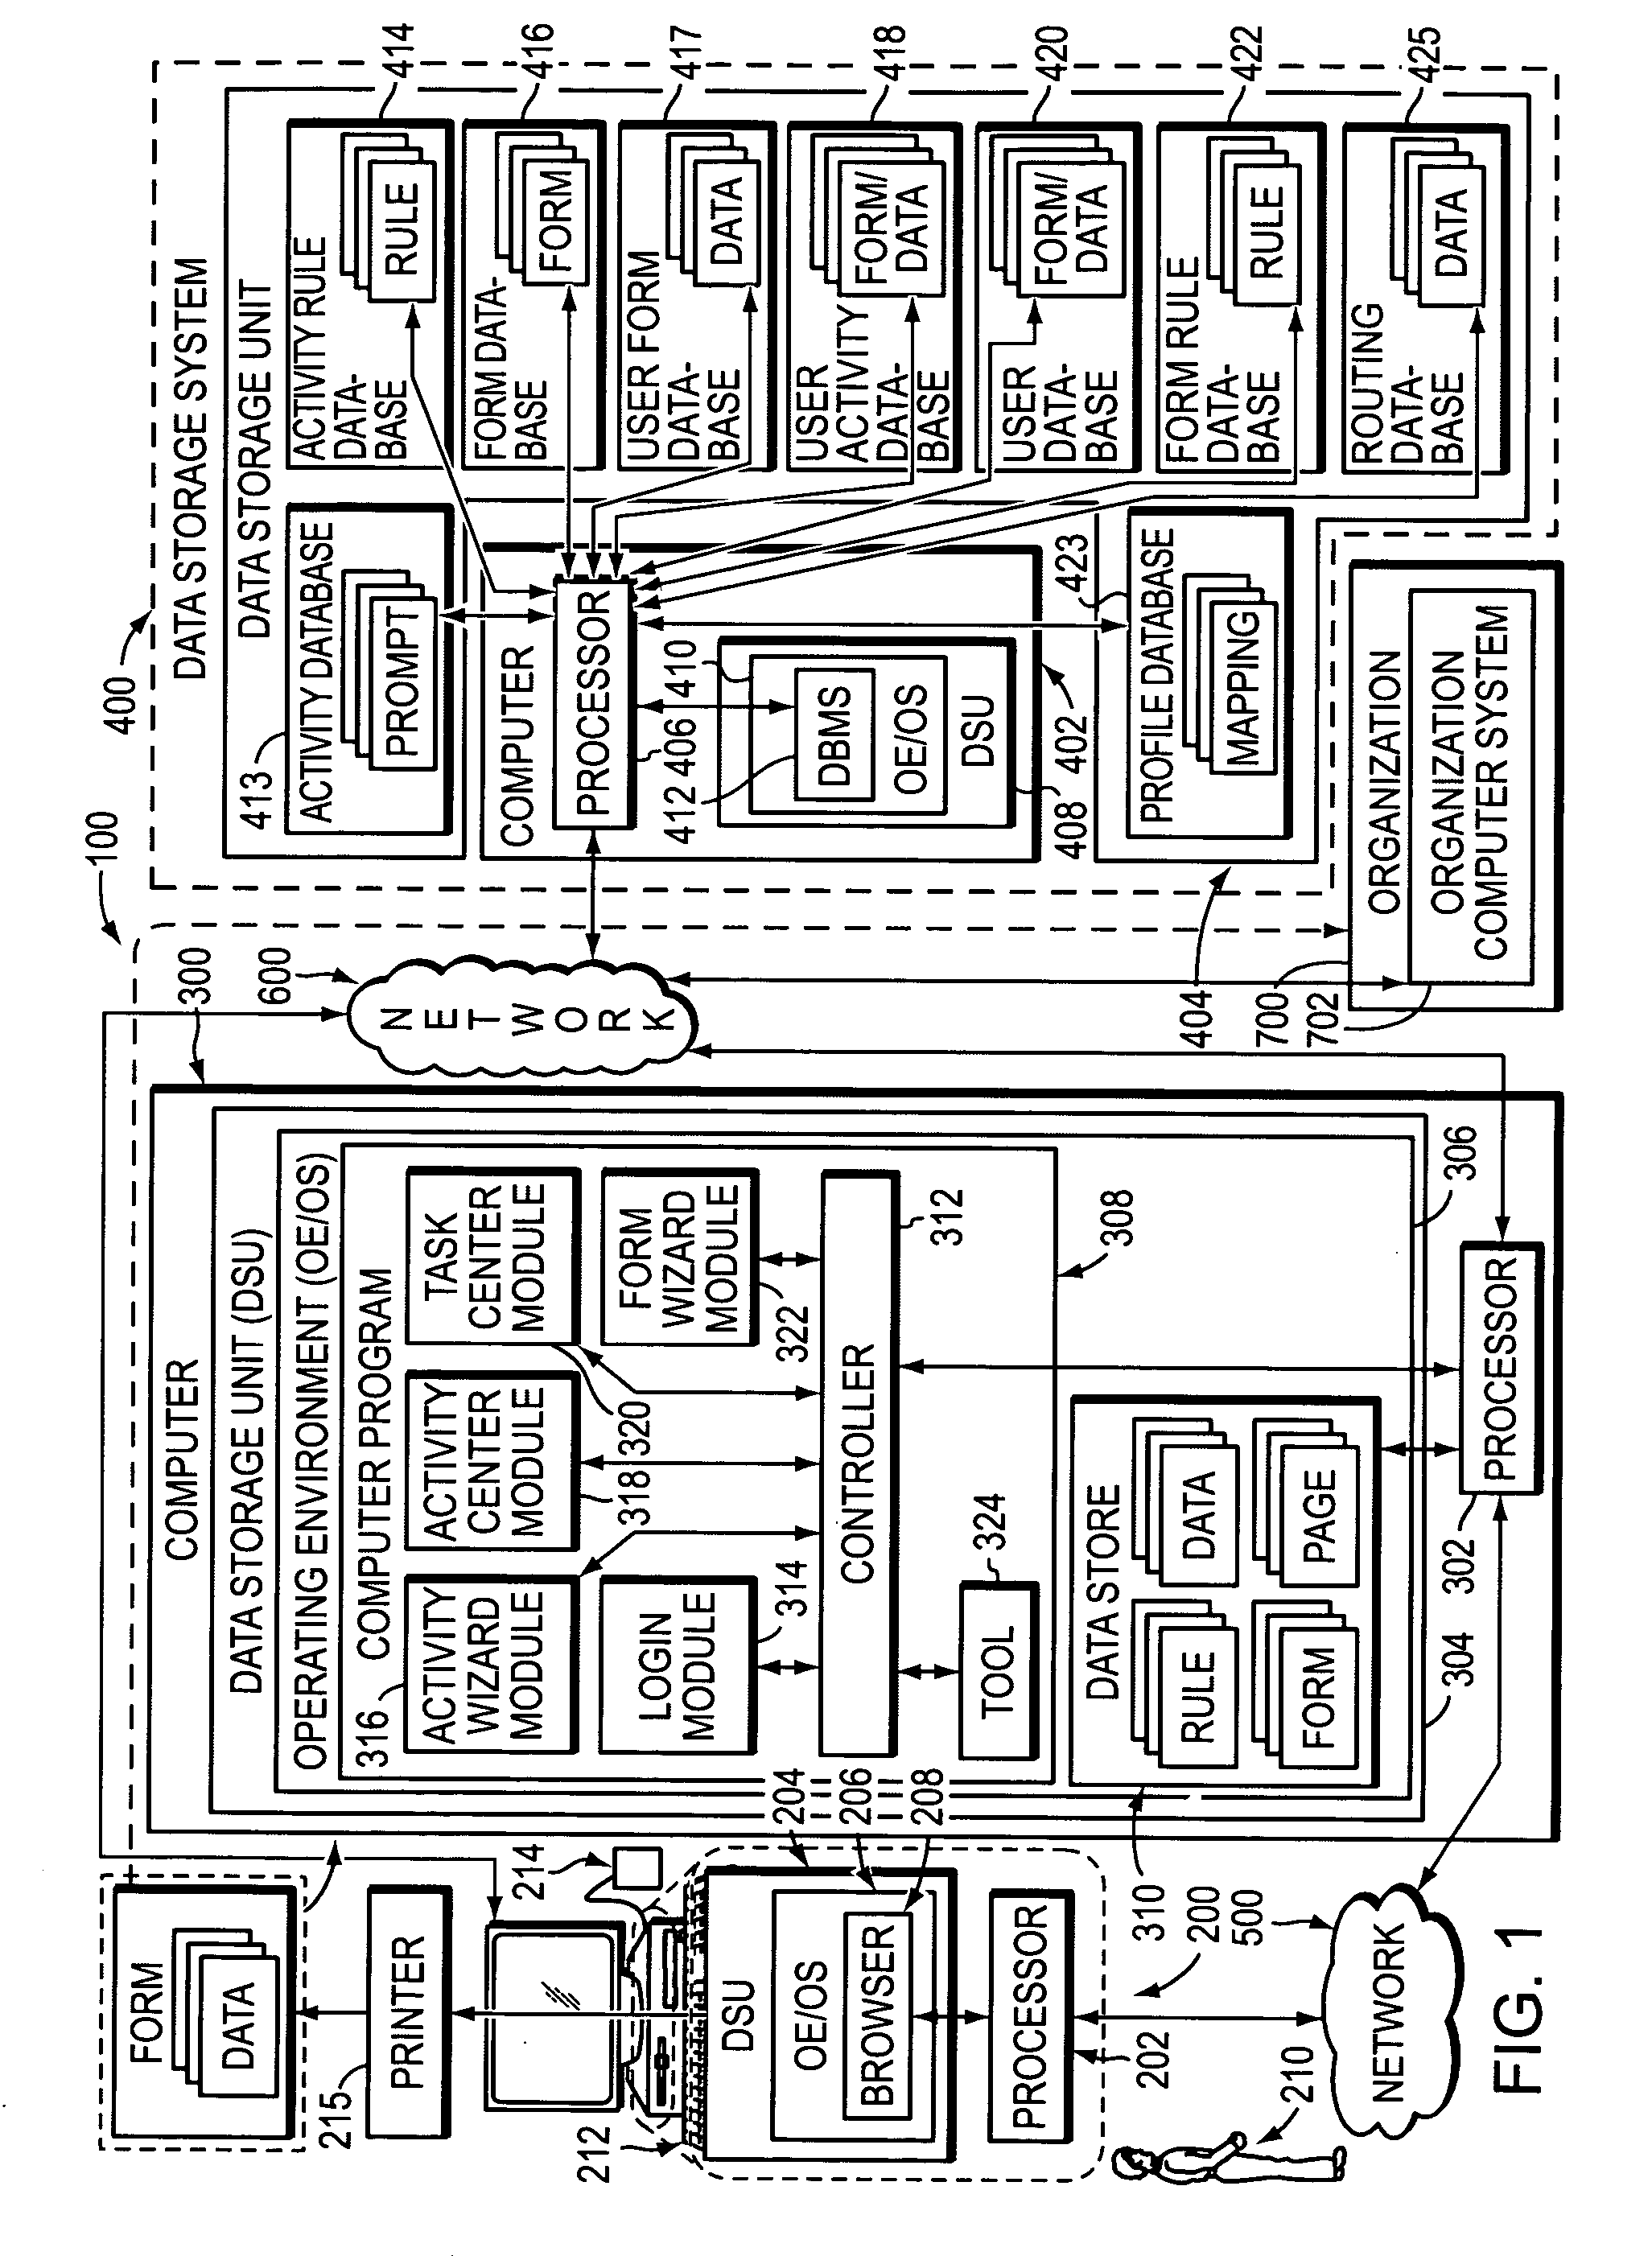 System for assisting user with task involving form, and related apparatuses, methods, and computer-readable media